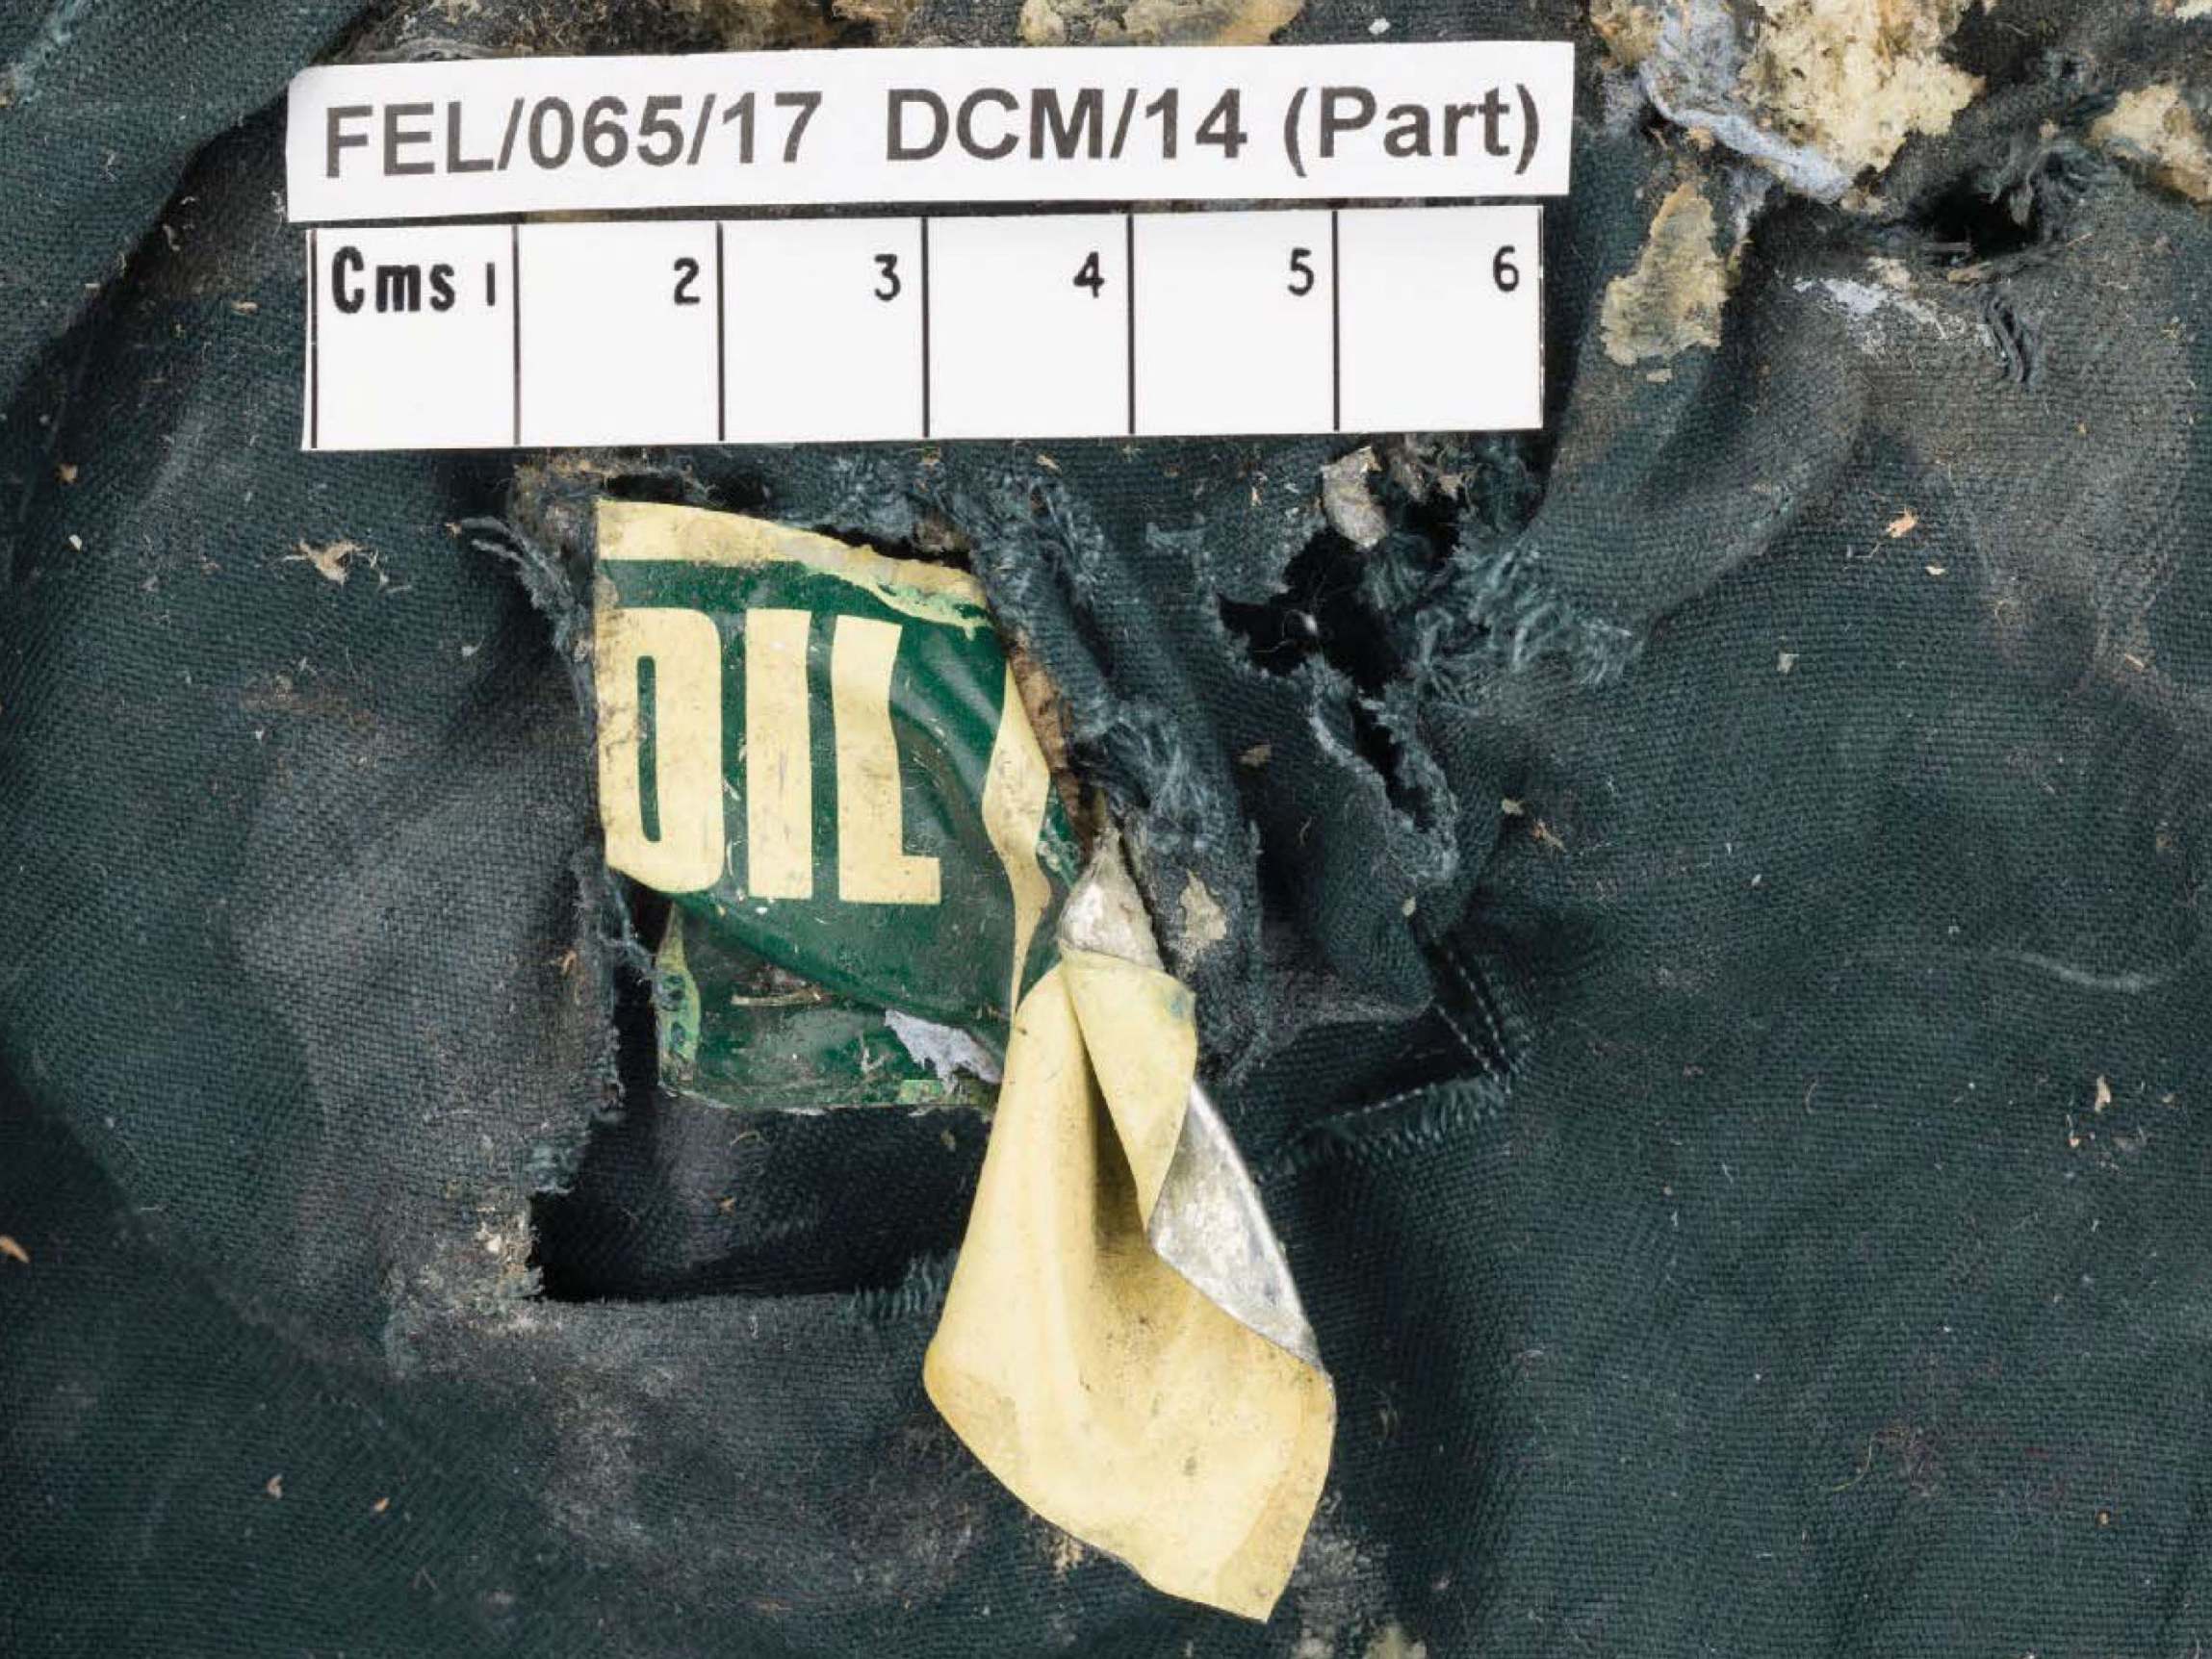 A fragment of a vegetable oil can of the type obtained by Hashem Abedi from the scene of the May 2017 Manchester Arena bombing (Greater Manchester Police )